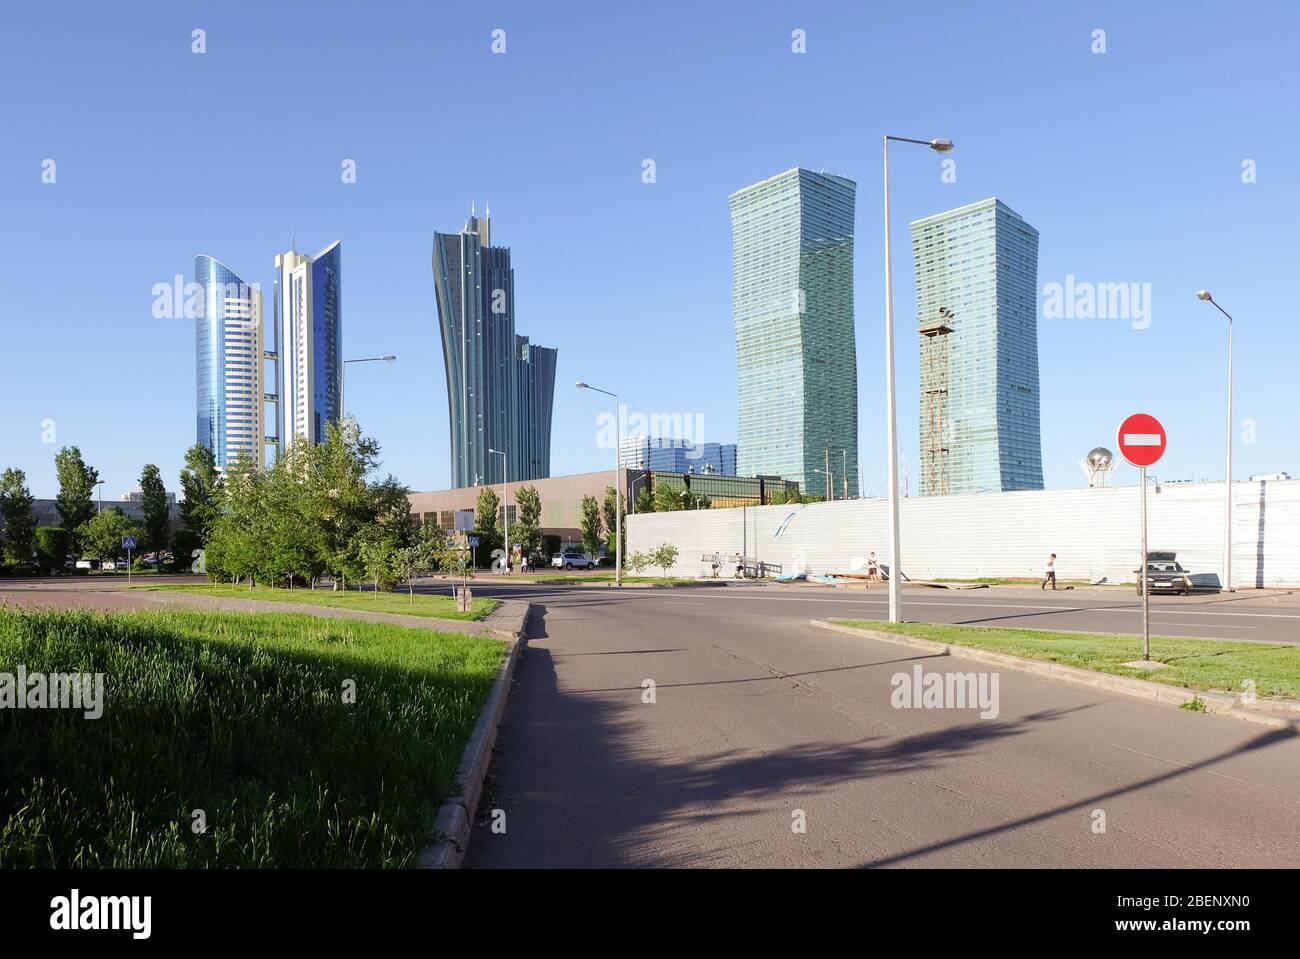 NUR-SULTAN, ASTANA, KAZAKHSTAN - JUNE 3, 2015: City view to the empty road with skyscapper buildings on the background at day time. Geometrical Stock Photo